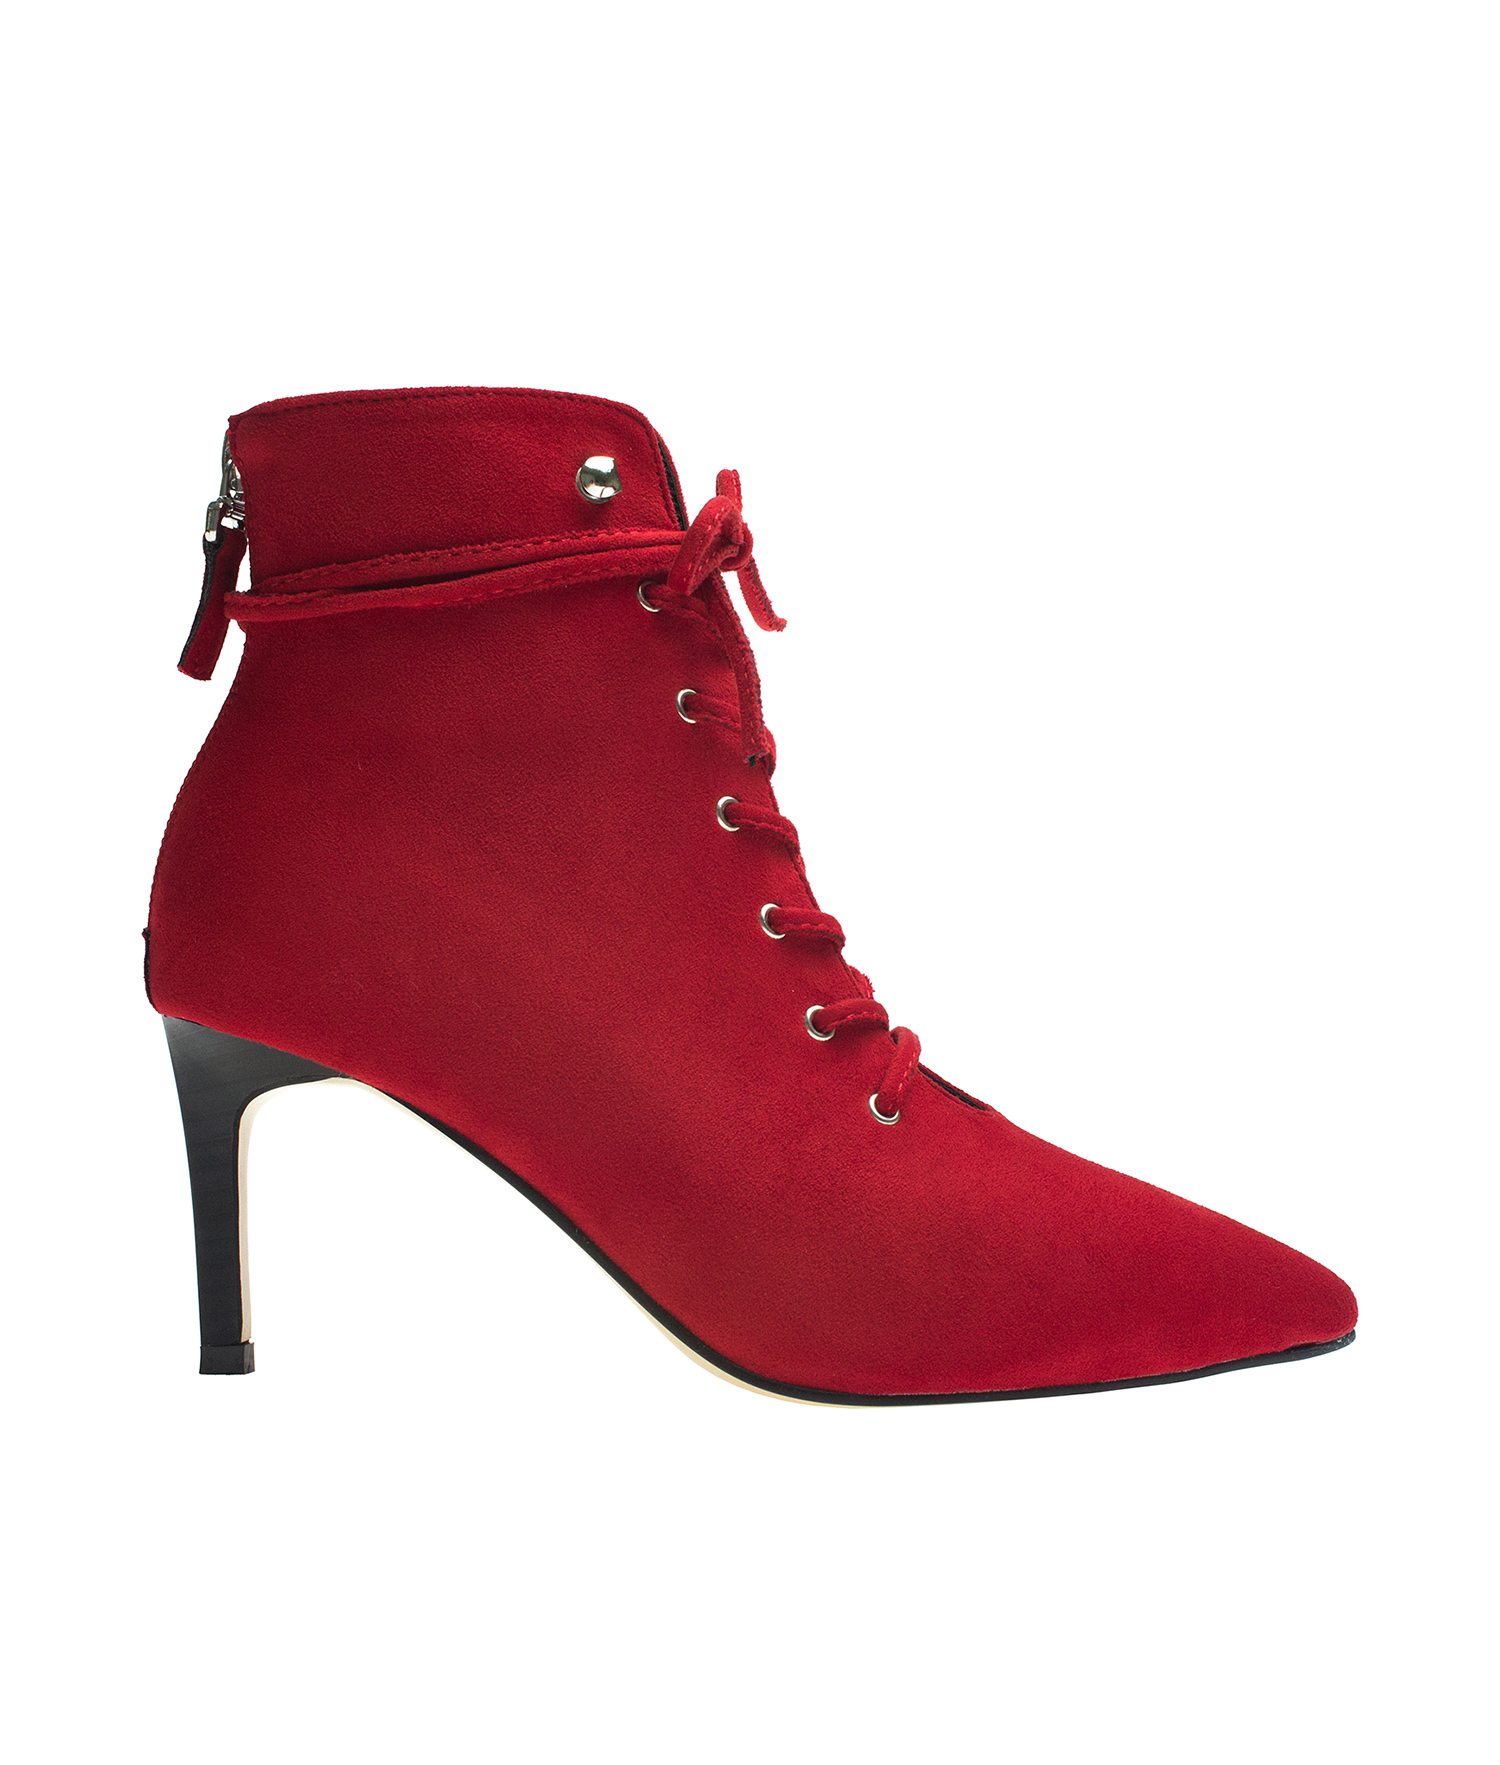 Womens Ankle Boots Zip Pointed Toe Suede Red Party Stiletto Heels Shoes A2177 